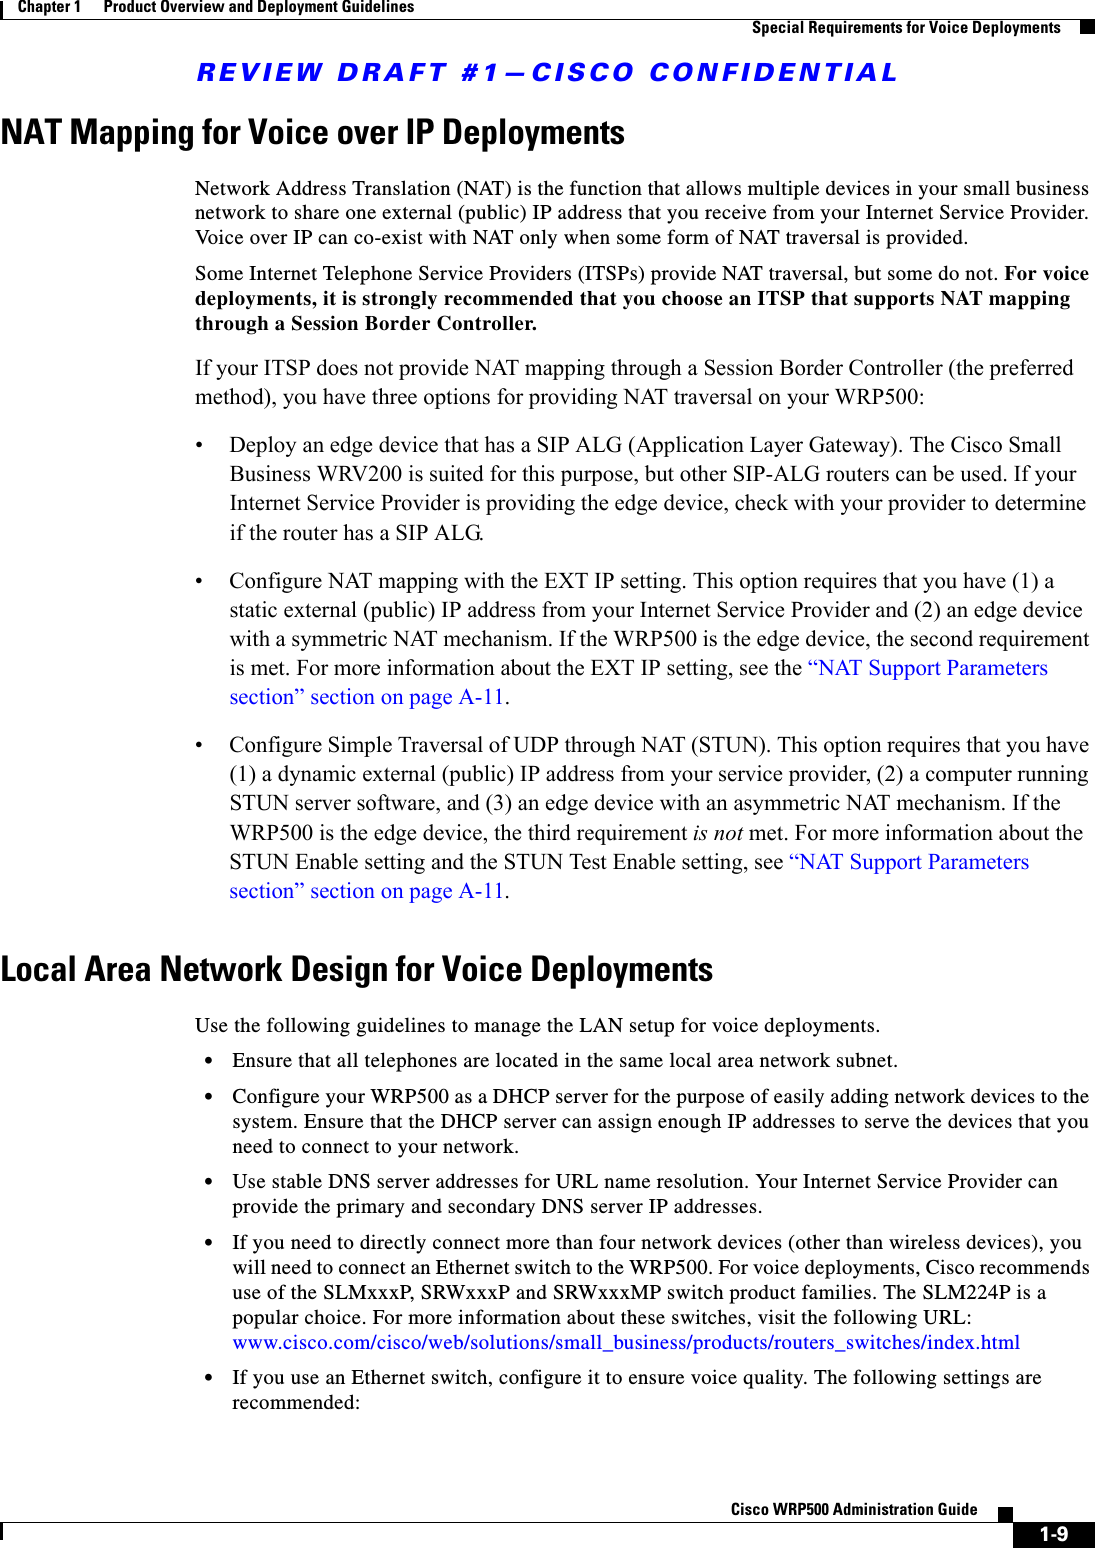 REVIEW DRAFT #1—CISCO CONFIDENTIAL1-9Cisco WRP500 Administration Guide Chapter 1      Product Overview and Deployment Guidelines  Special Requirements for Voice DeploymentsNAT Mapping for Voice over IP DeploymentsNetwork Address Translation (NAT) is the function that allows multiple devices in your small business network to share one external (public) IP address that you receive from your Internet Service Provider. Voice over IP can co-exist with NAT only when some form of NAT traversal is provided. Some Internet Telephone Service Providers (ITSPs) provide NAT traversal, but some do not. For voice deployments, it is strongly recommended that you choose an ITSP that supports NAT mapping through a Session Border Controller. If your ITSP does not provide NAT mapping through a Session Border Controller (the preferred method), you have three options for providing NAT traversal on your WRP500:• Deploy an edge device that has a SIP ALG (Application Layer Gateway). The Cisco Small Business WRV200 is suited for this purpose, but other SIP-ALG routers can be used. If your Internet Service Provider is providing the edge device, check with your provider to determine if the router has a SIP ALG.• Configure NAT mapping with the EXT IP setting. This option requires that you have (1) a static external (public) IP address from your Internet Service Provider and (2) an edge device with a symmetric NAT mechanism. If the WRP500 is the edge device, the second requirement is met. For more information about the EXT IP setting, see the “NAT Support Parameters section” section on page A-11.• Configure Simple Traversal of UDP through NAT (STUN). This option requires that you have (1) a dynamic external (public) IP address from your service provider, (2) a computer running STUN server software, and (3) an edge device with an asymmetric NAT mechanism. If the WRP500 is the edge device, the third requirement is not met. For more information about the STUN Enable setting and the STUN Test Enable setting, see “NAT Support Parameters section” section on page A-11.Local Area Network Design for Voice DeploymentsUse the following guidelines to manage the LAN setup for voice deployments.•Ensure that all telephones are located in the same local area network subnet.•Configure your WRP500 as a DHCP server for the purpose of easily adding network devices to the system. Ensure that the DHCP server can assign enough IP addresses to serve the devices that you need to connect to your network. •Use stable DNS server addresses for URL name resolution. Your Internet Service Provider can provide the primary and secondary DNS server IP addresses.•If you need to directly connect more than four network devices (other than wireless devices), you will need to connect an Ethernet switch to the WRP500. For voice deployments, Cisco recommends use of the SLMxxxP, SRWxxxP and SRWxxxMP switch product families. The SLM224P is a popular choice. For more information about these switches, visit the following URL: www.cisco.com/cisco/web/solutions/small_business/products/routers_switches/index.html•If you use an Ethernet switch, configure it to ensure voice quality. The following settings are recommended: